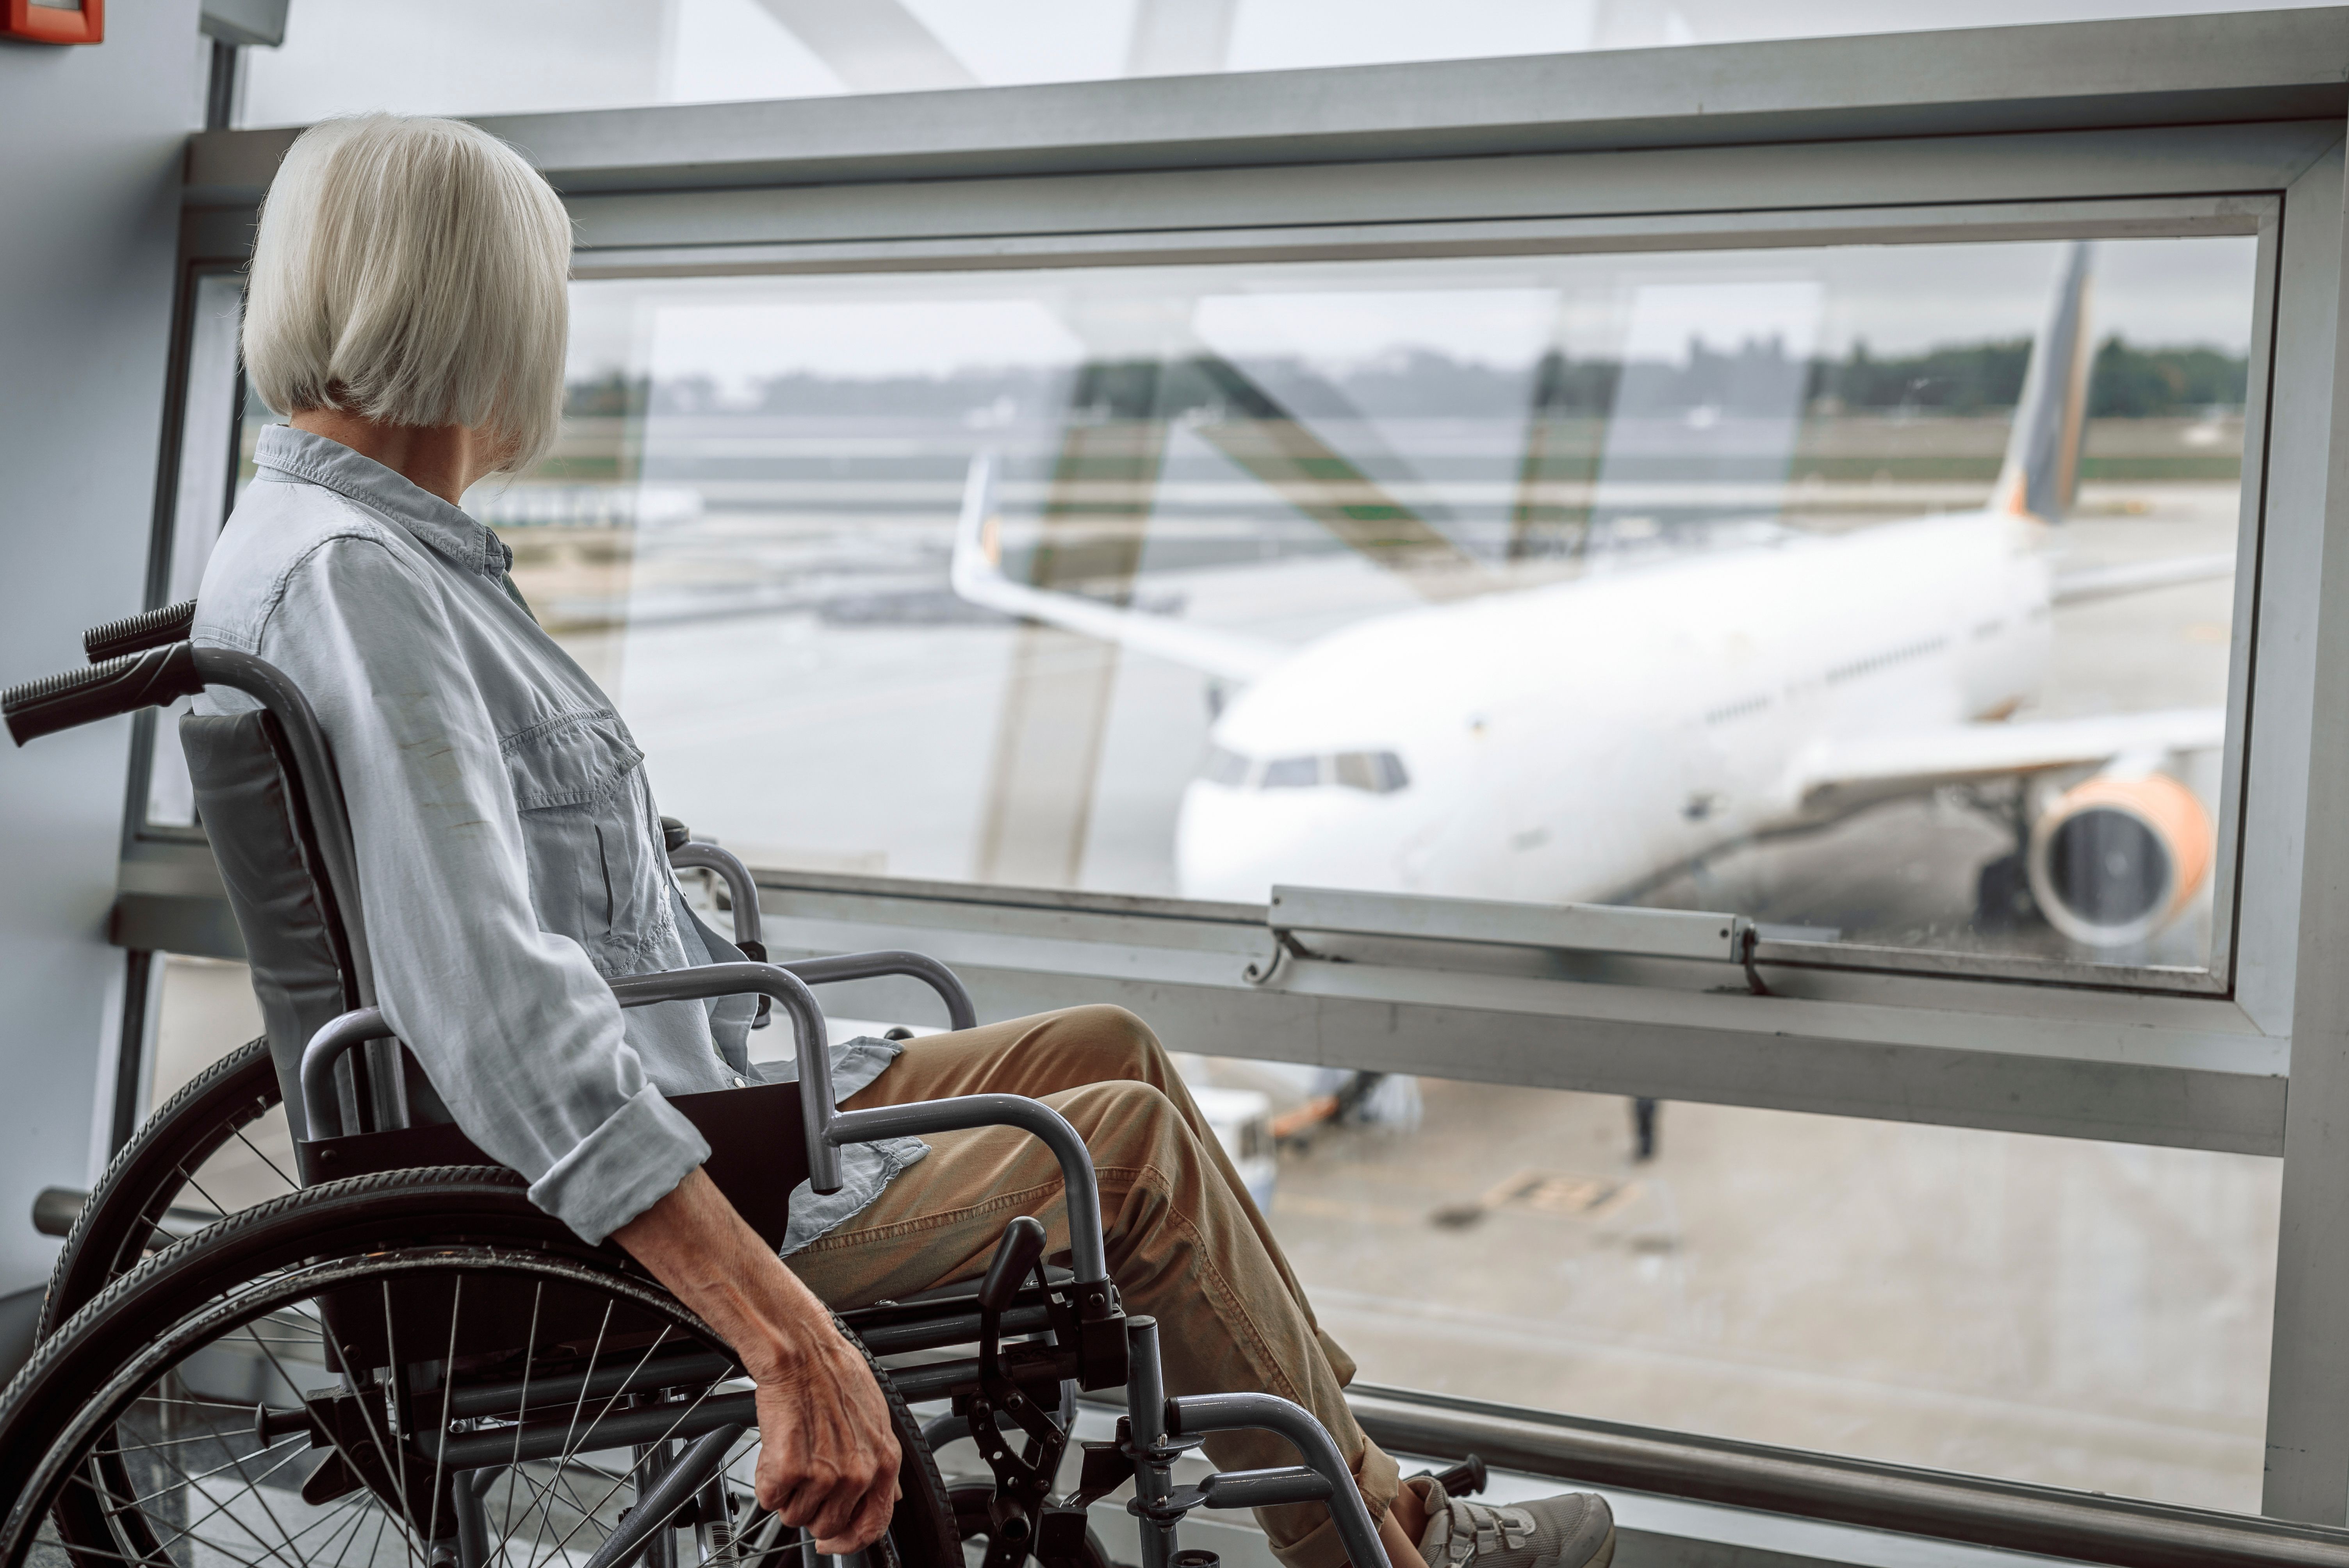 shutterstock_1424469368 - elderly lady in wheelchair waiting for generic jetliner at airport